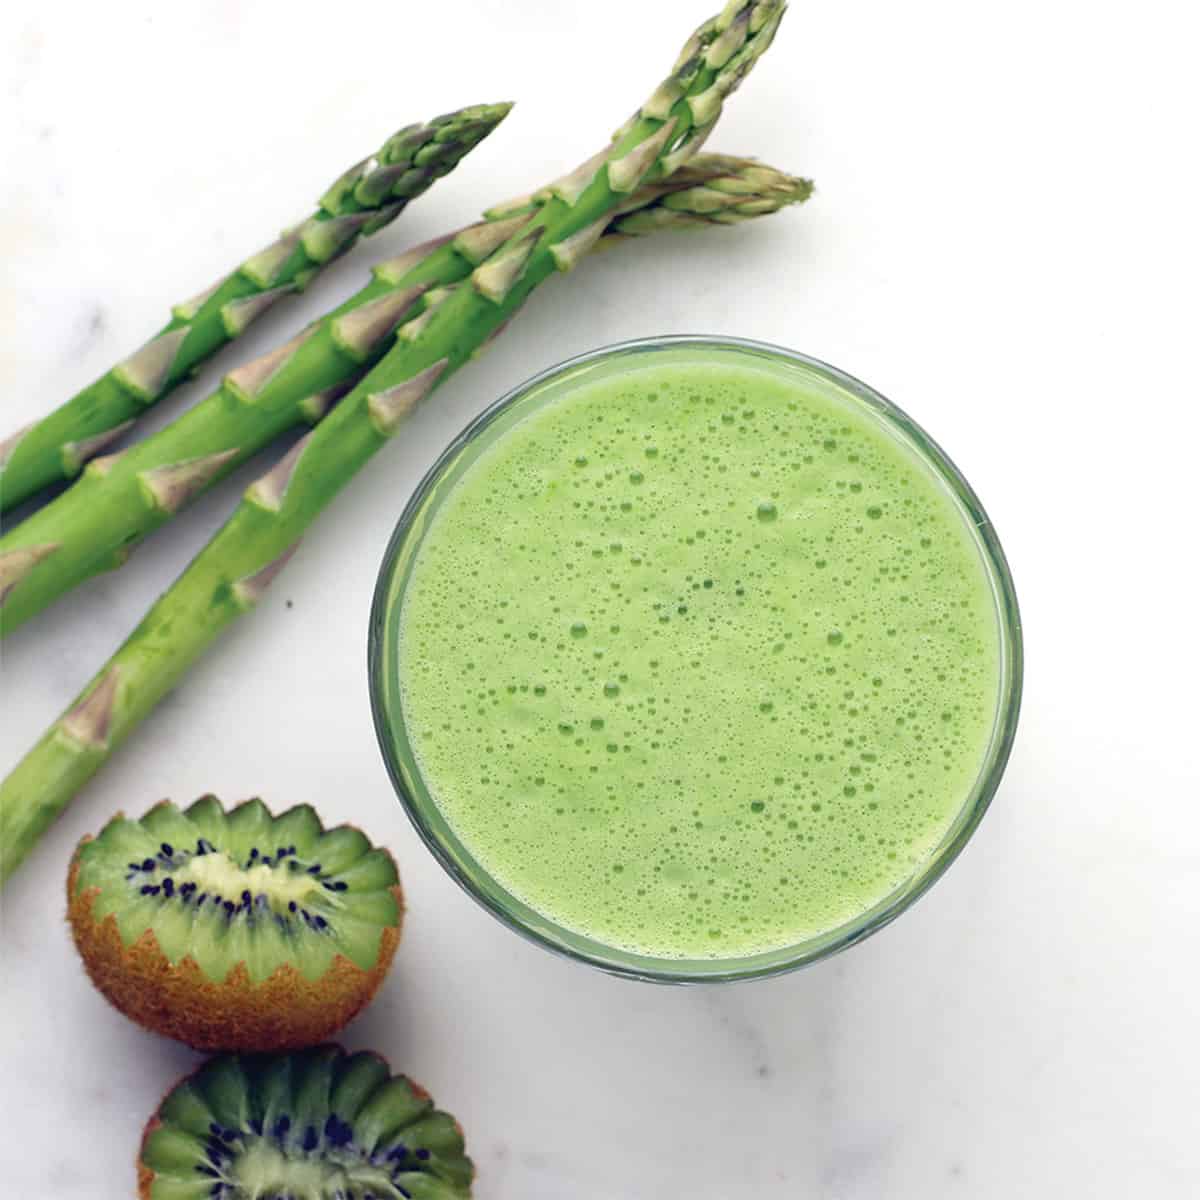 asparagus smoothie for the vegetables for smoothies article.